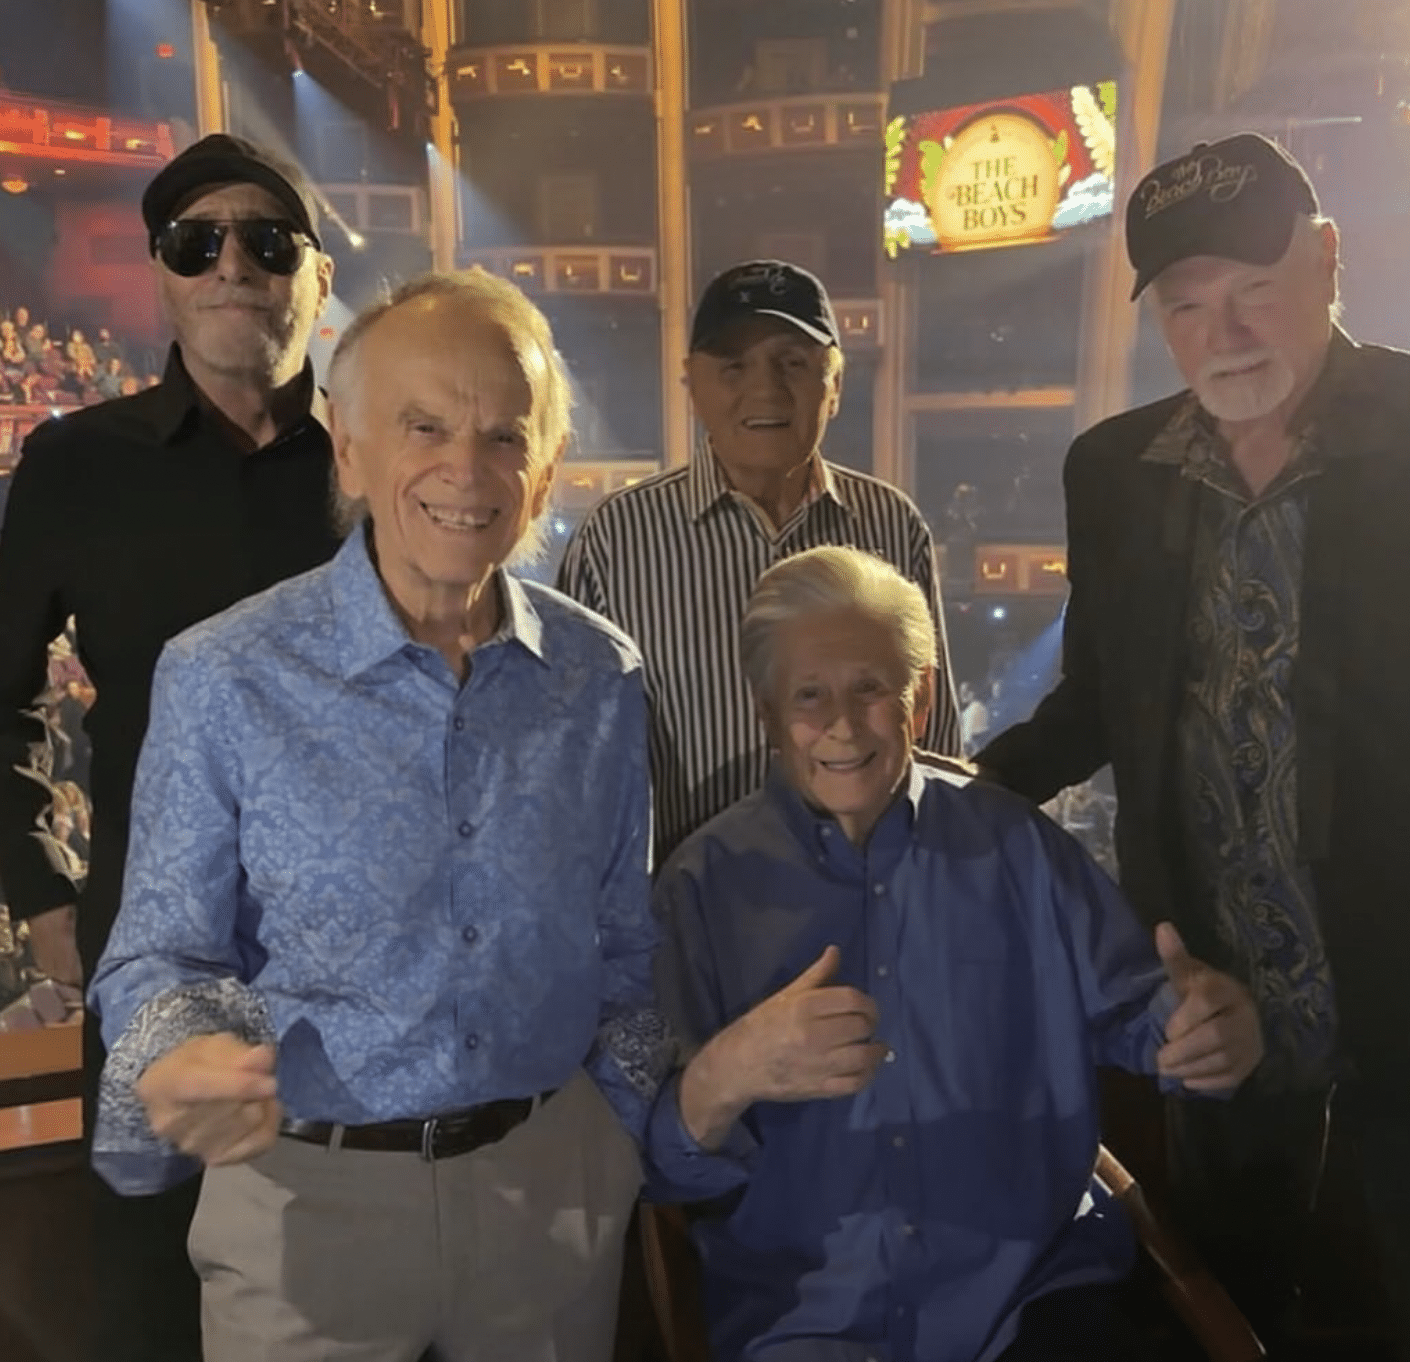 Brian and the ‘Boys reunite for “A GRAMMY Salute To The Beach Boys Tribute Concert” at the Dolby Theatre in Hollywood, California.